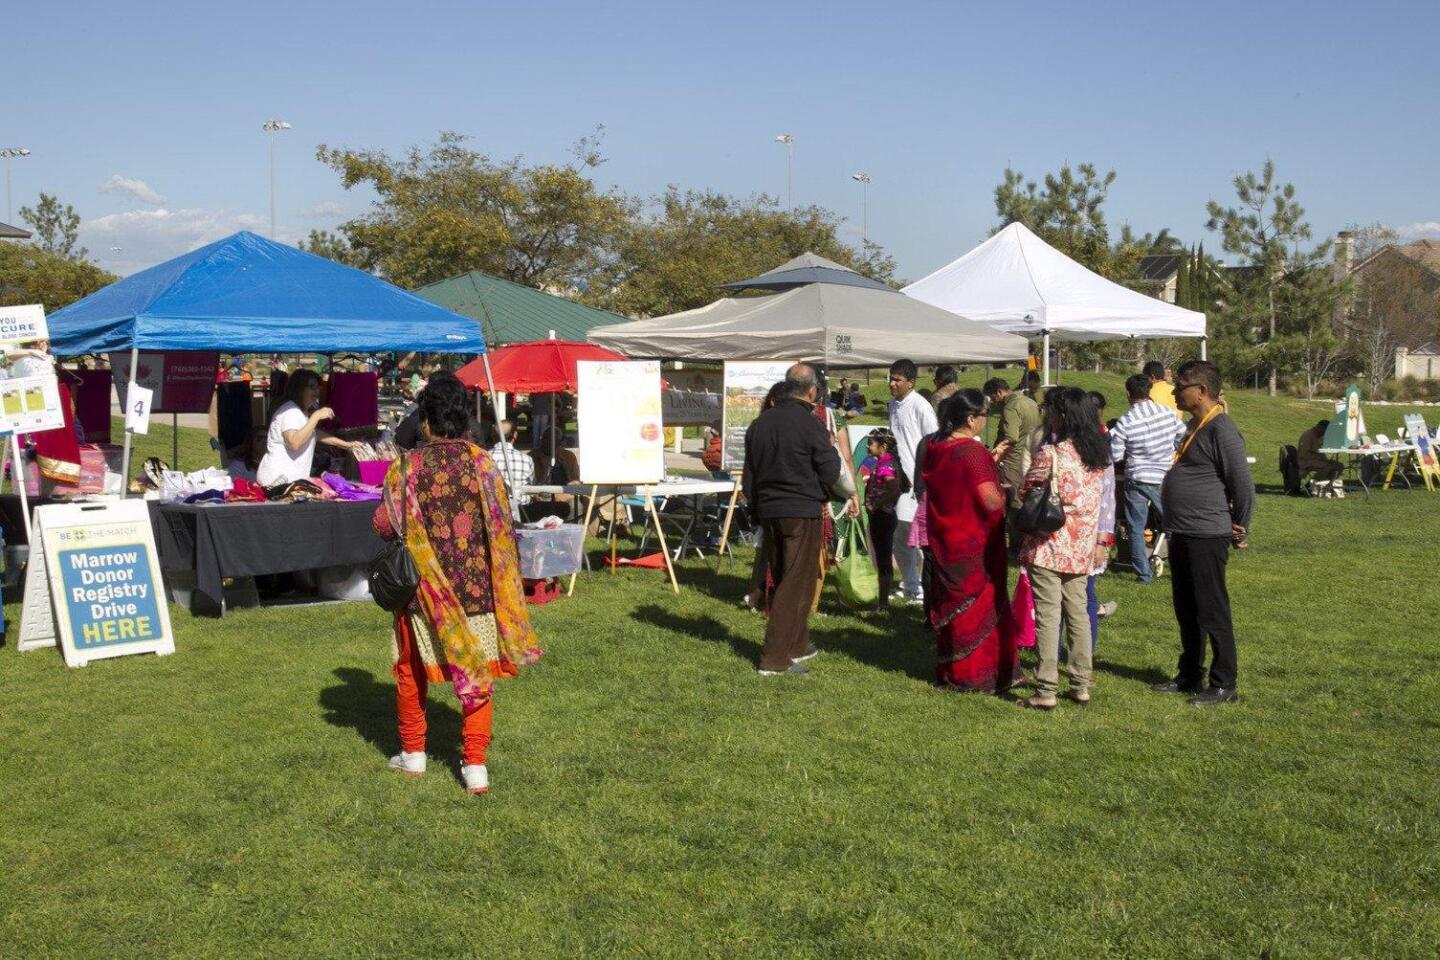 Ocean Air park in Carmel Valley hosted the Indian cultural event